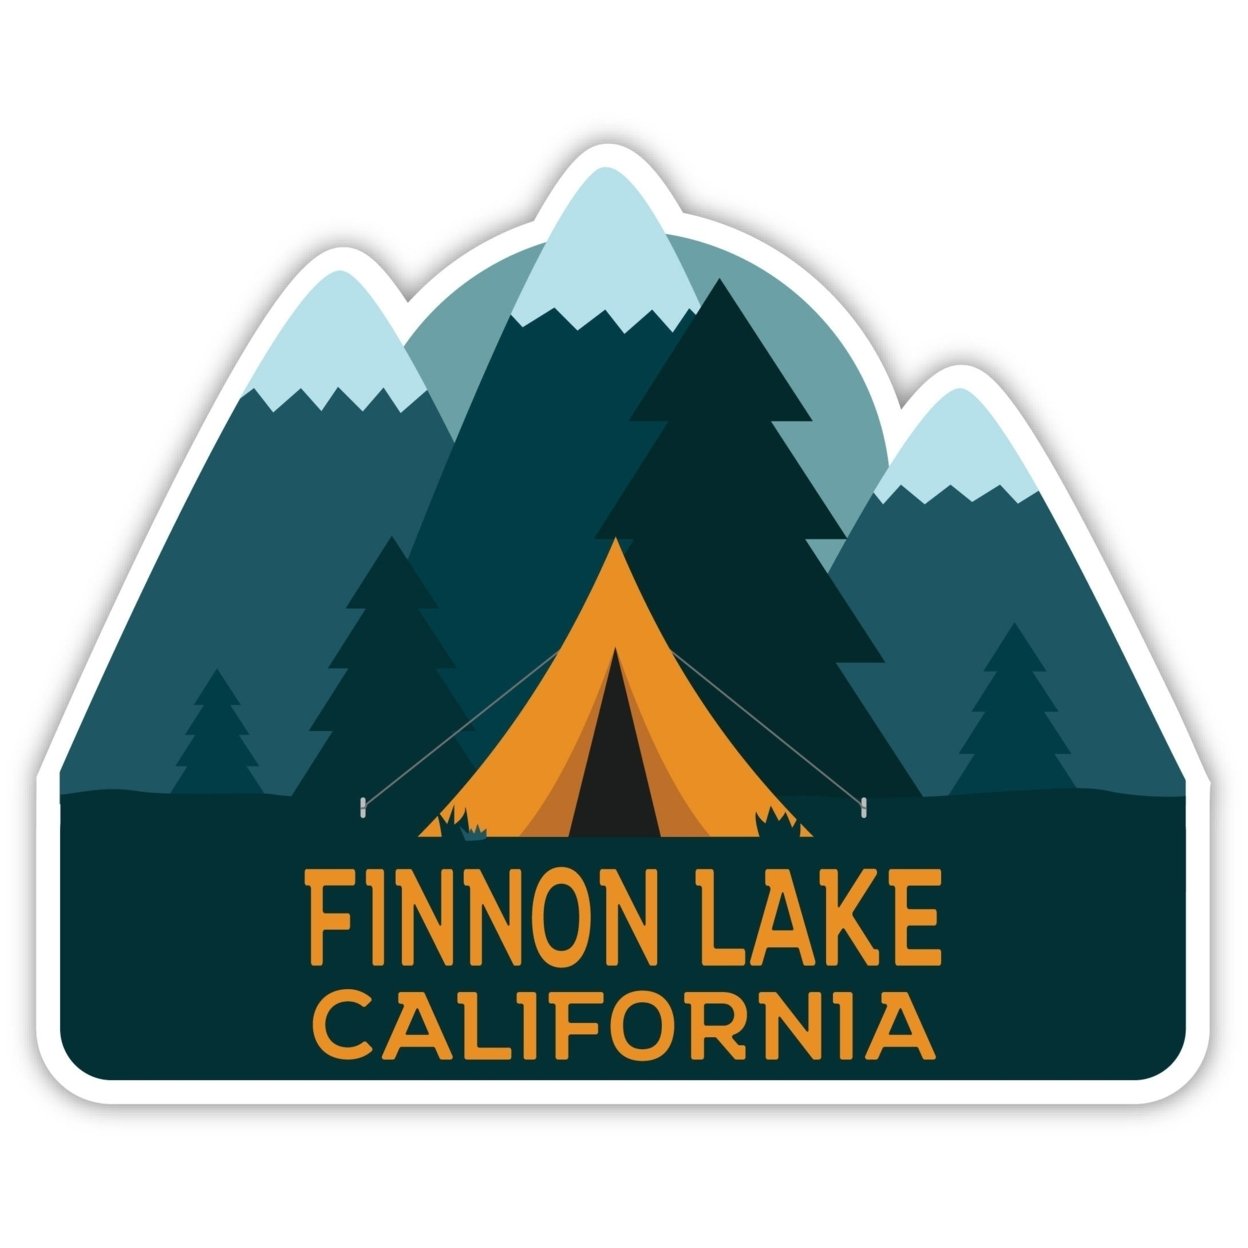 Finnon Lake California Souvenir Decorative Stickers (Choose Theme And Size) - 4-Pack, 10-Inch, Great Outdoors